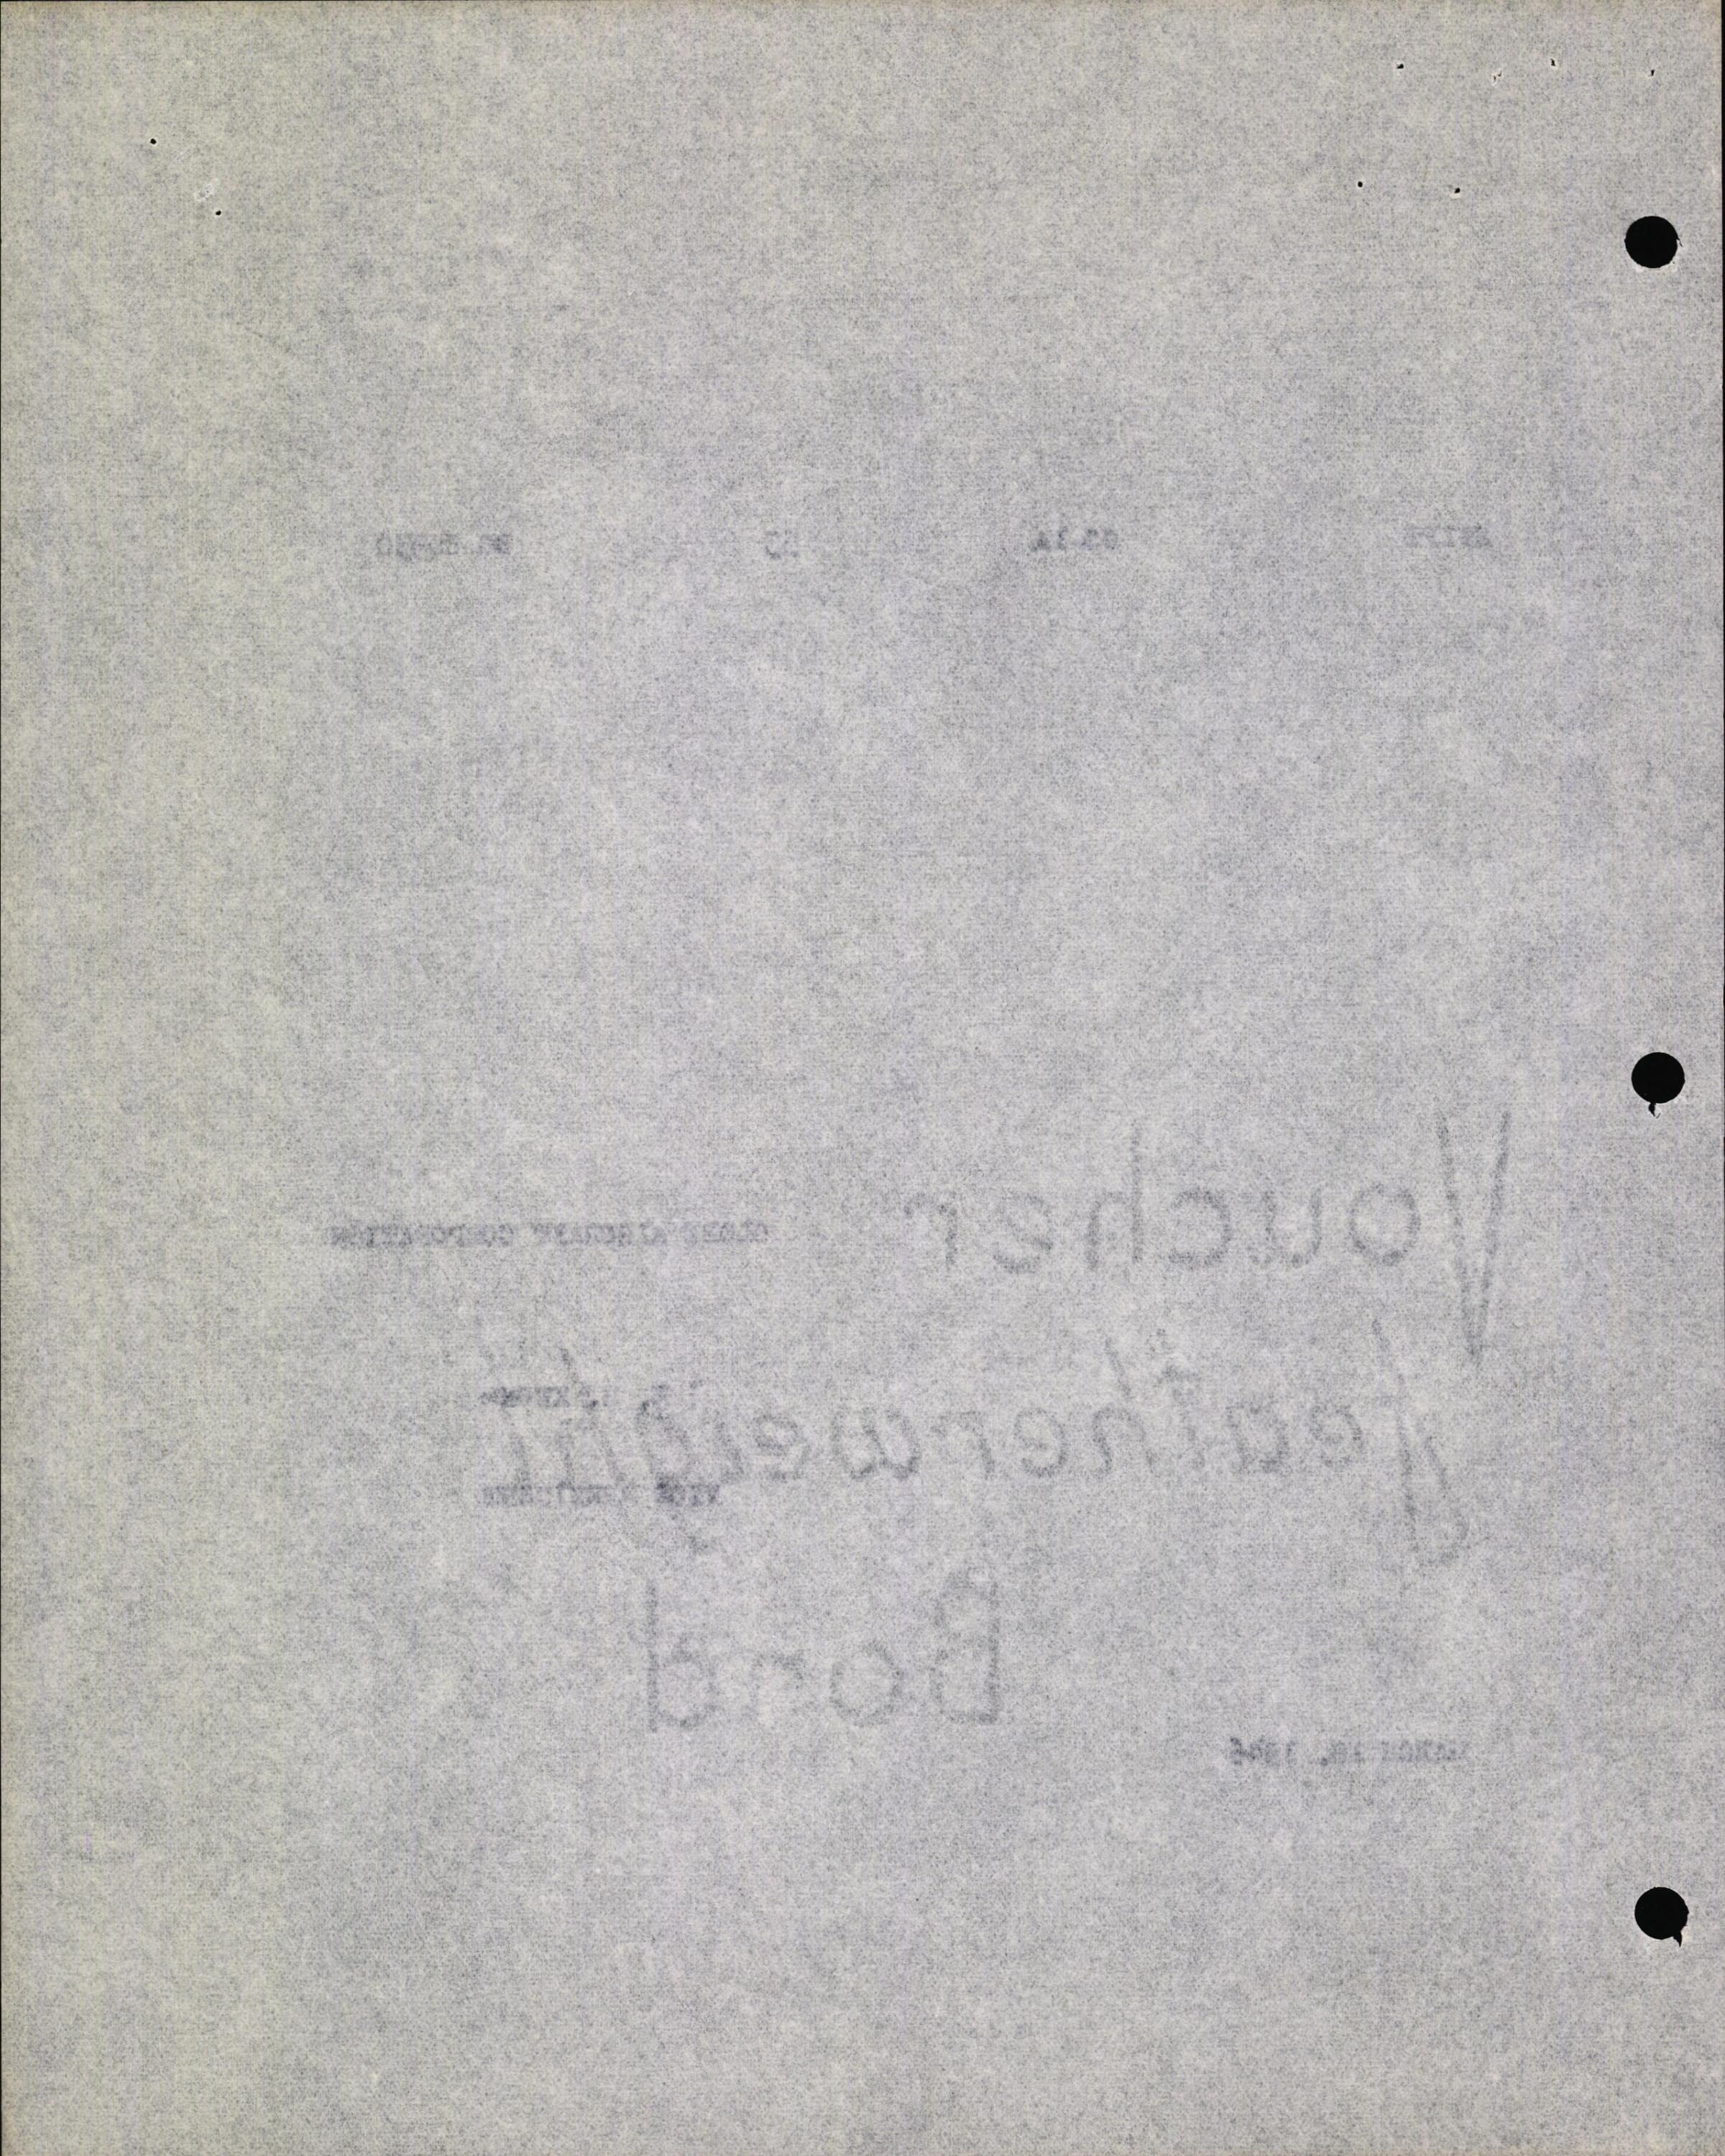 Sample page 6 from AirCorps Library document: Technical Information for Serial Number 53